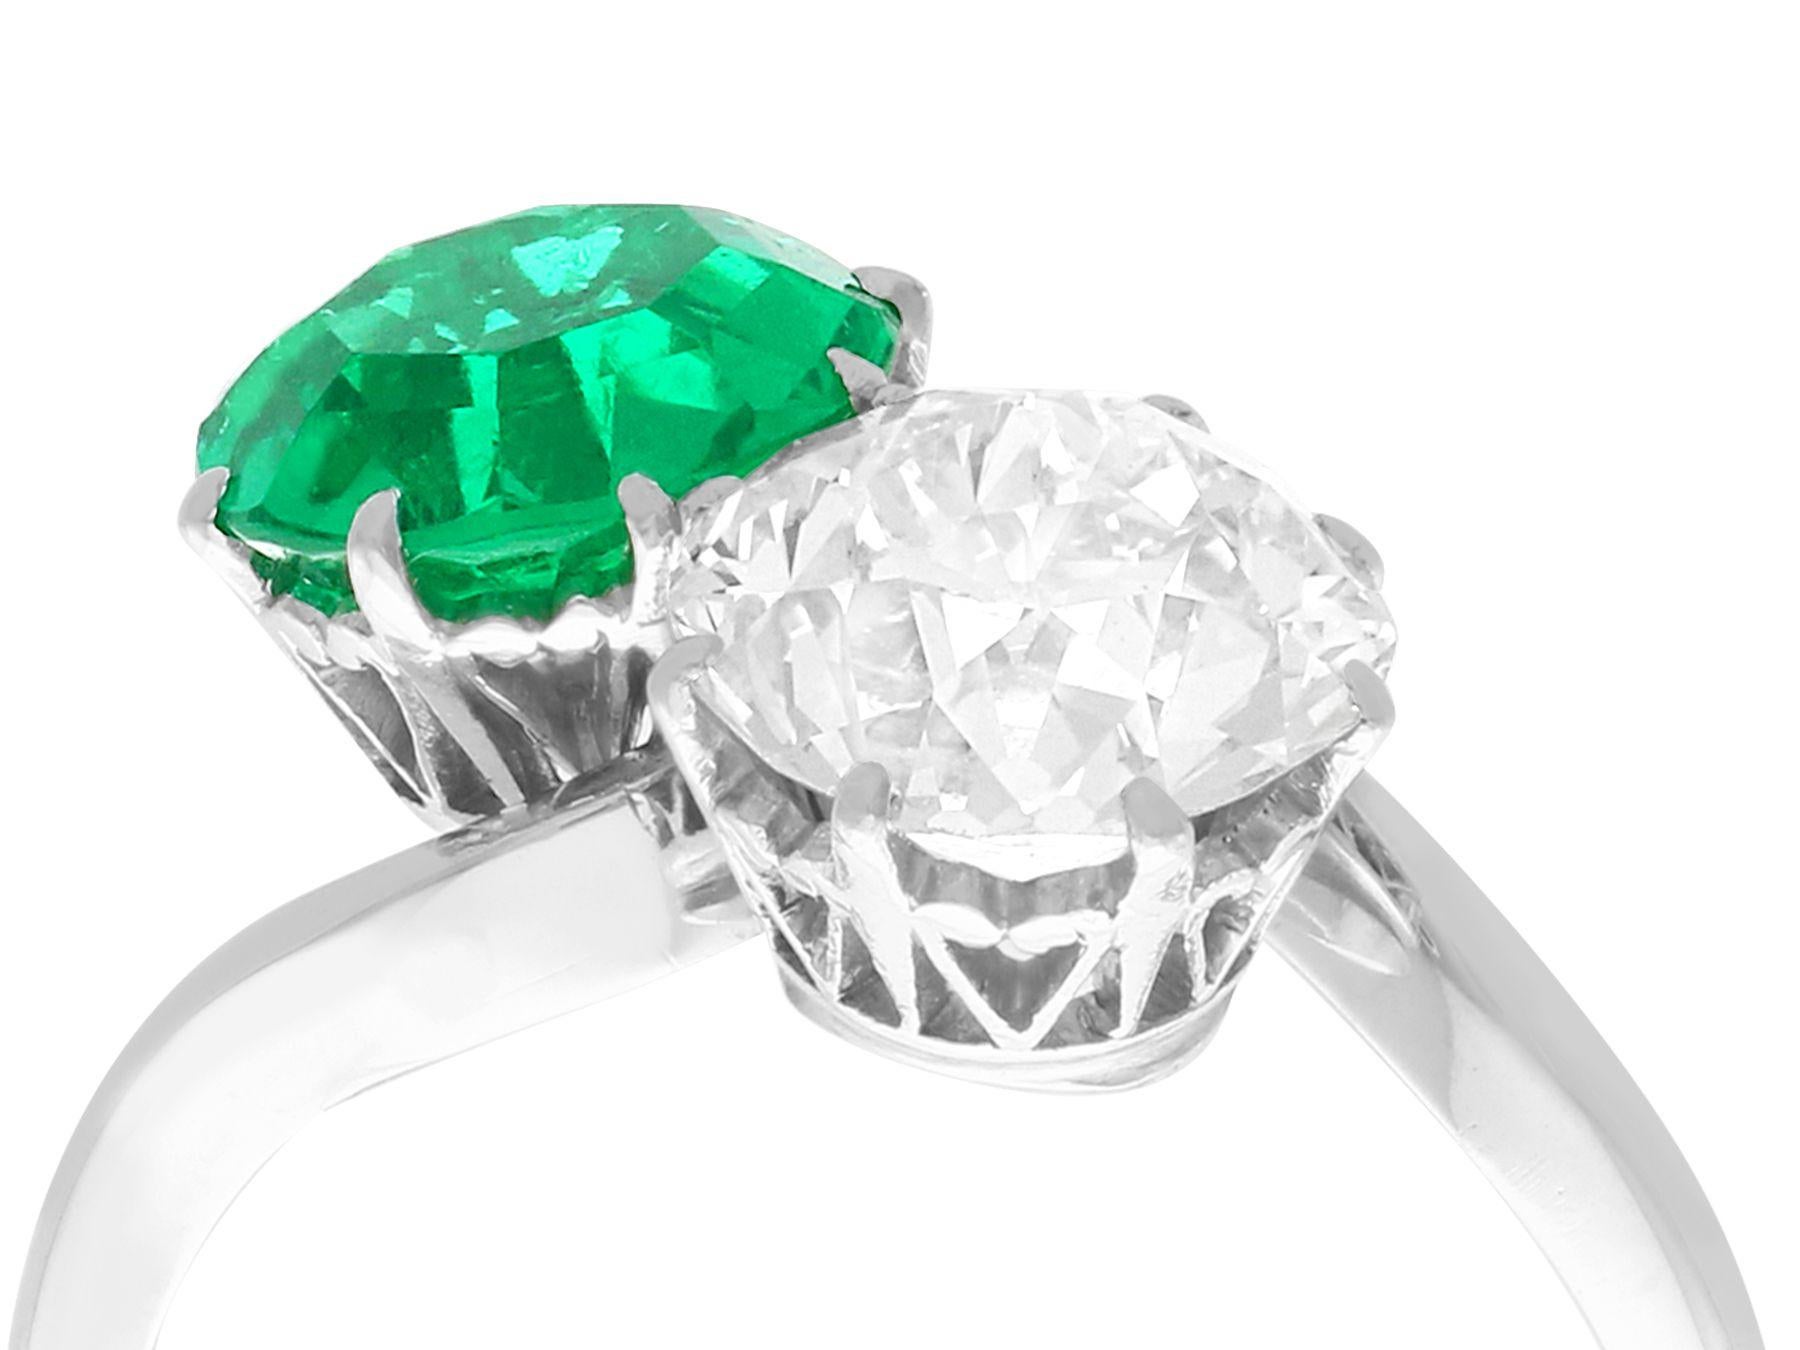 A stunning, fine and impressive antique 1.70 carat Colombian emerald, 2.18 carat diamond and platinum twist ring; part of our diverse antique jewelry and estate jewelry collections

This stunning, fine and impressive Colombian emerald and diamond